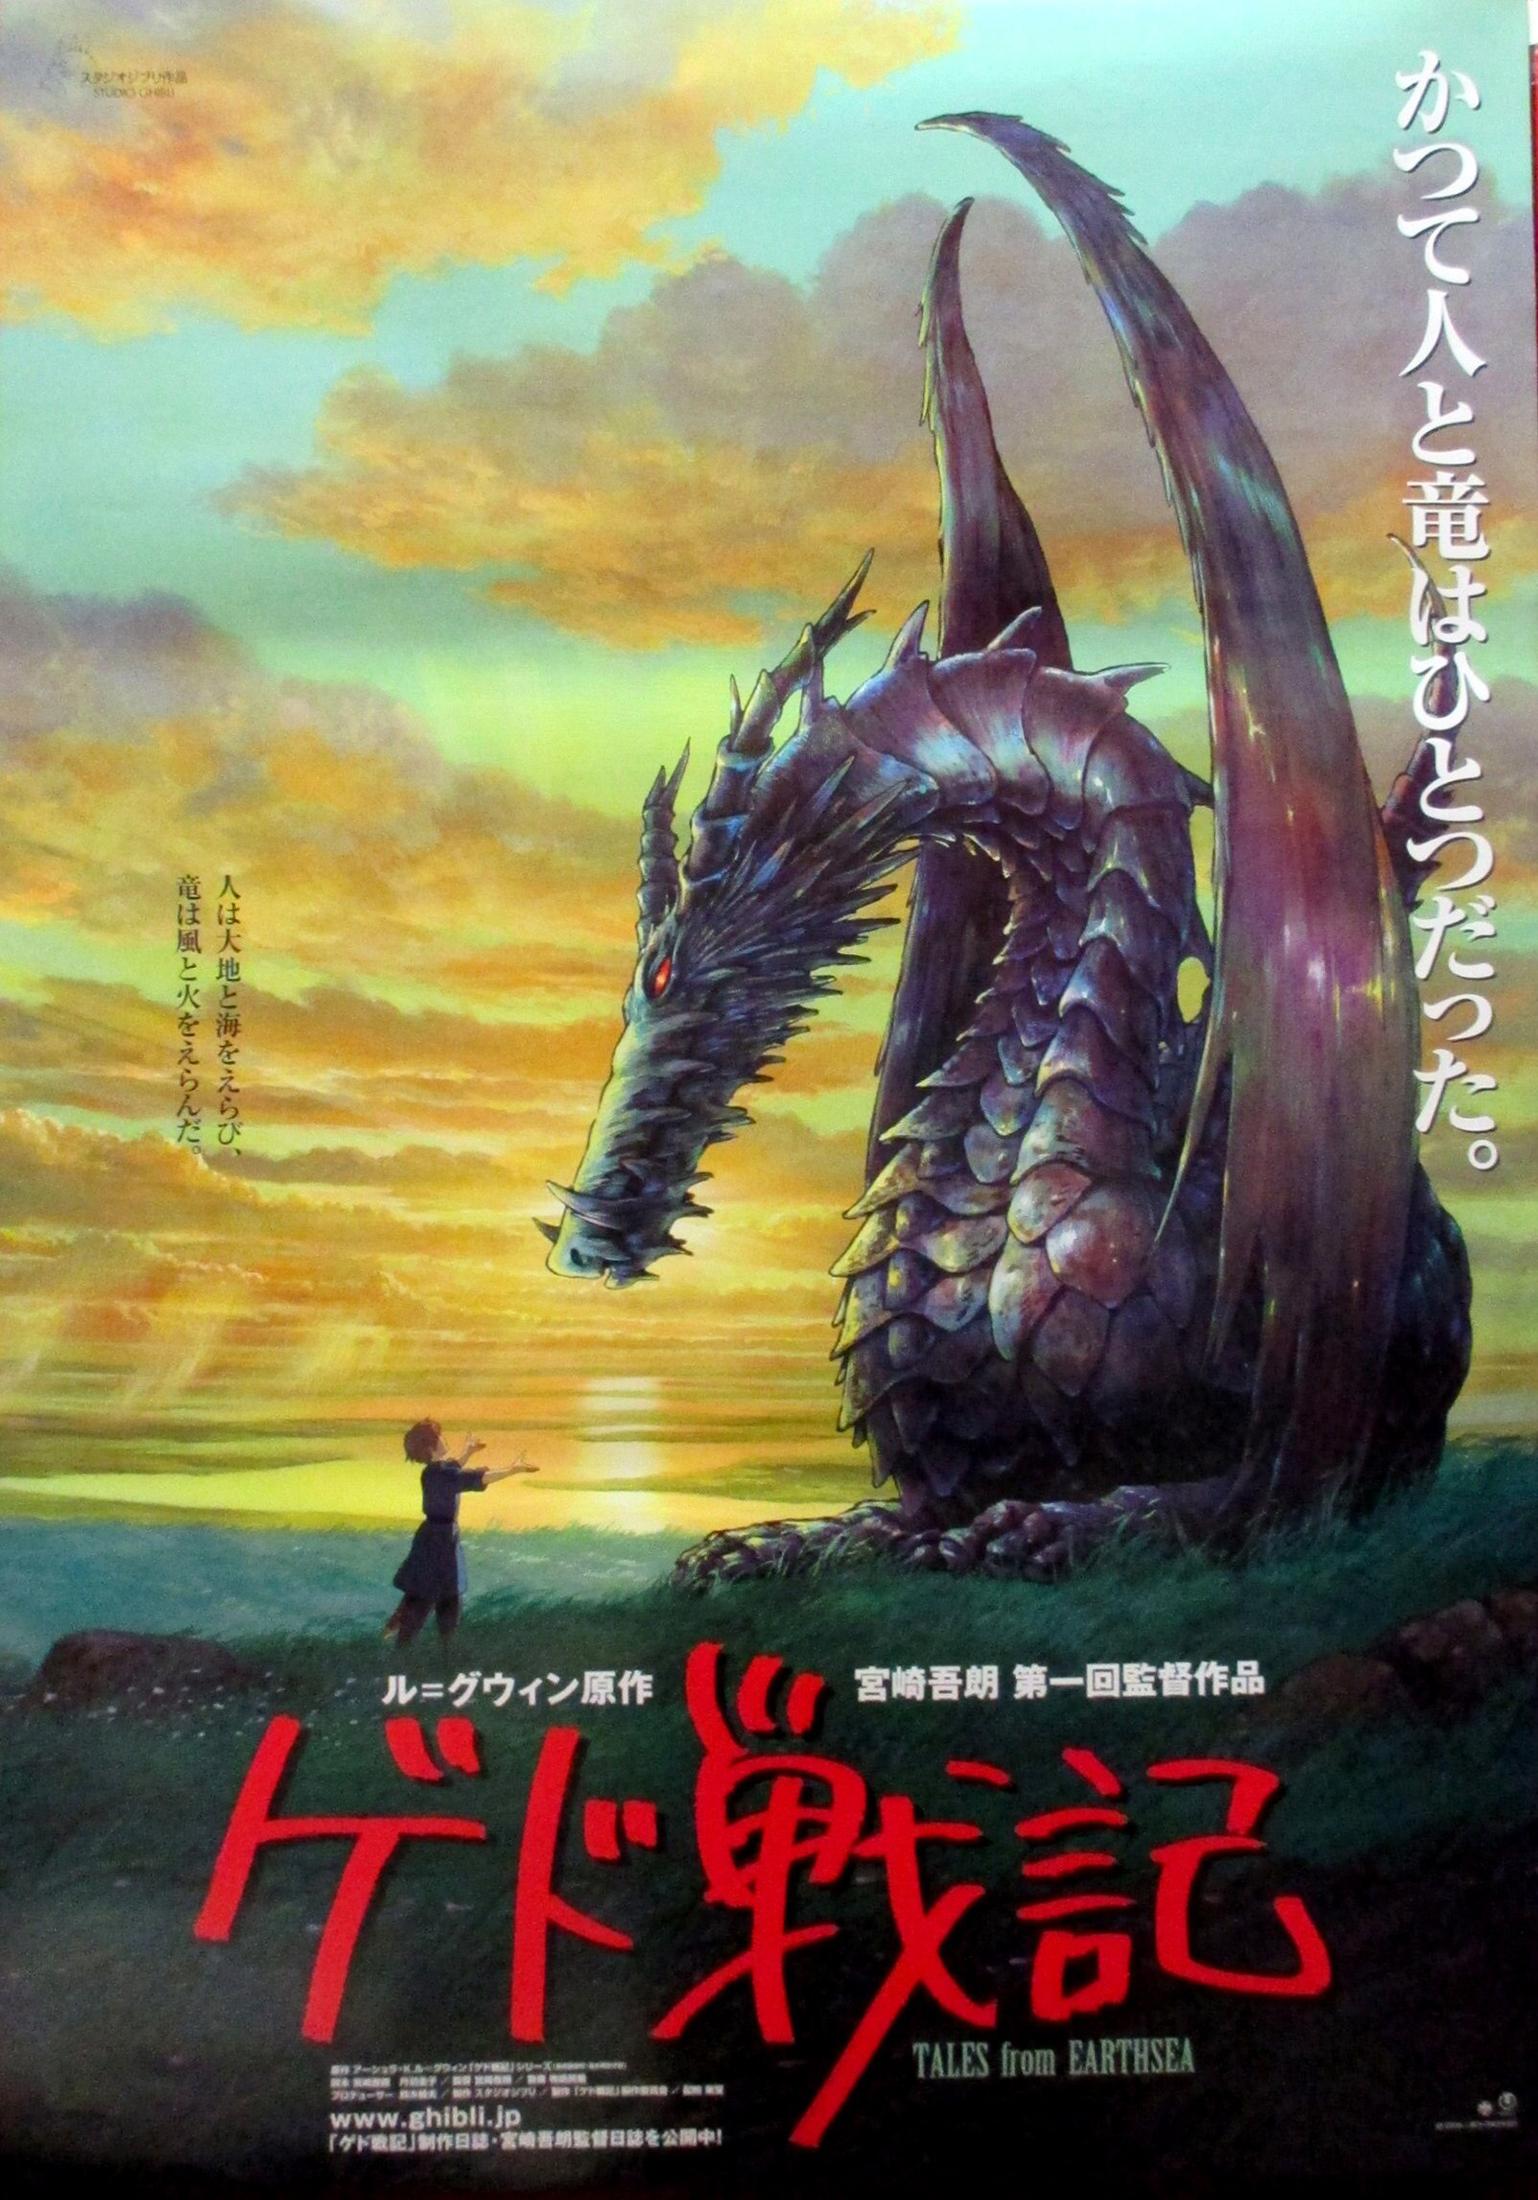 tales from earthsea poster